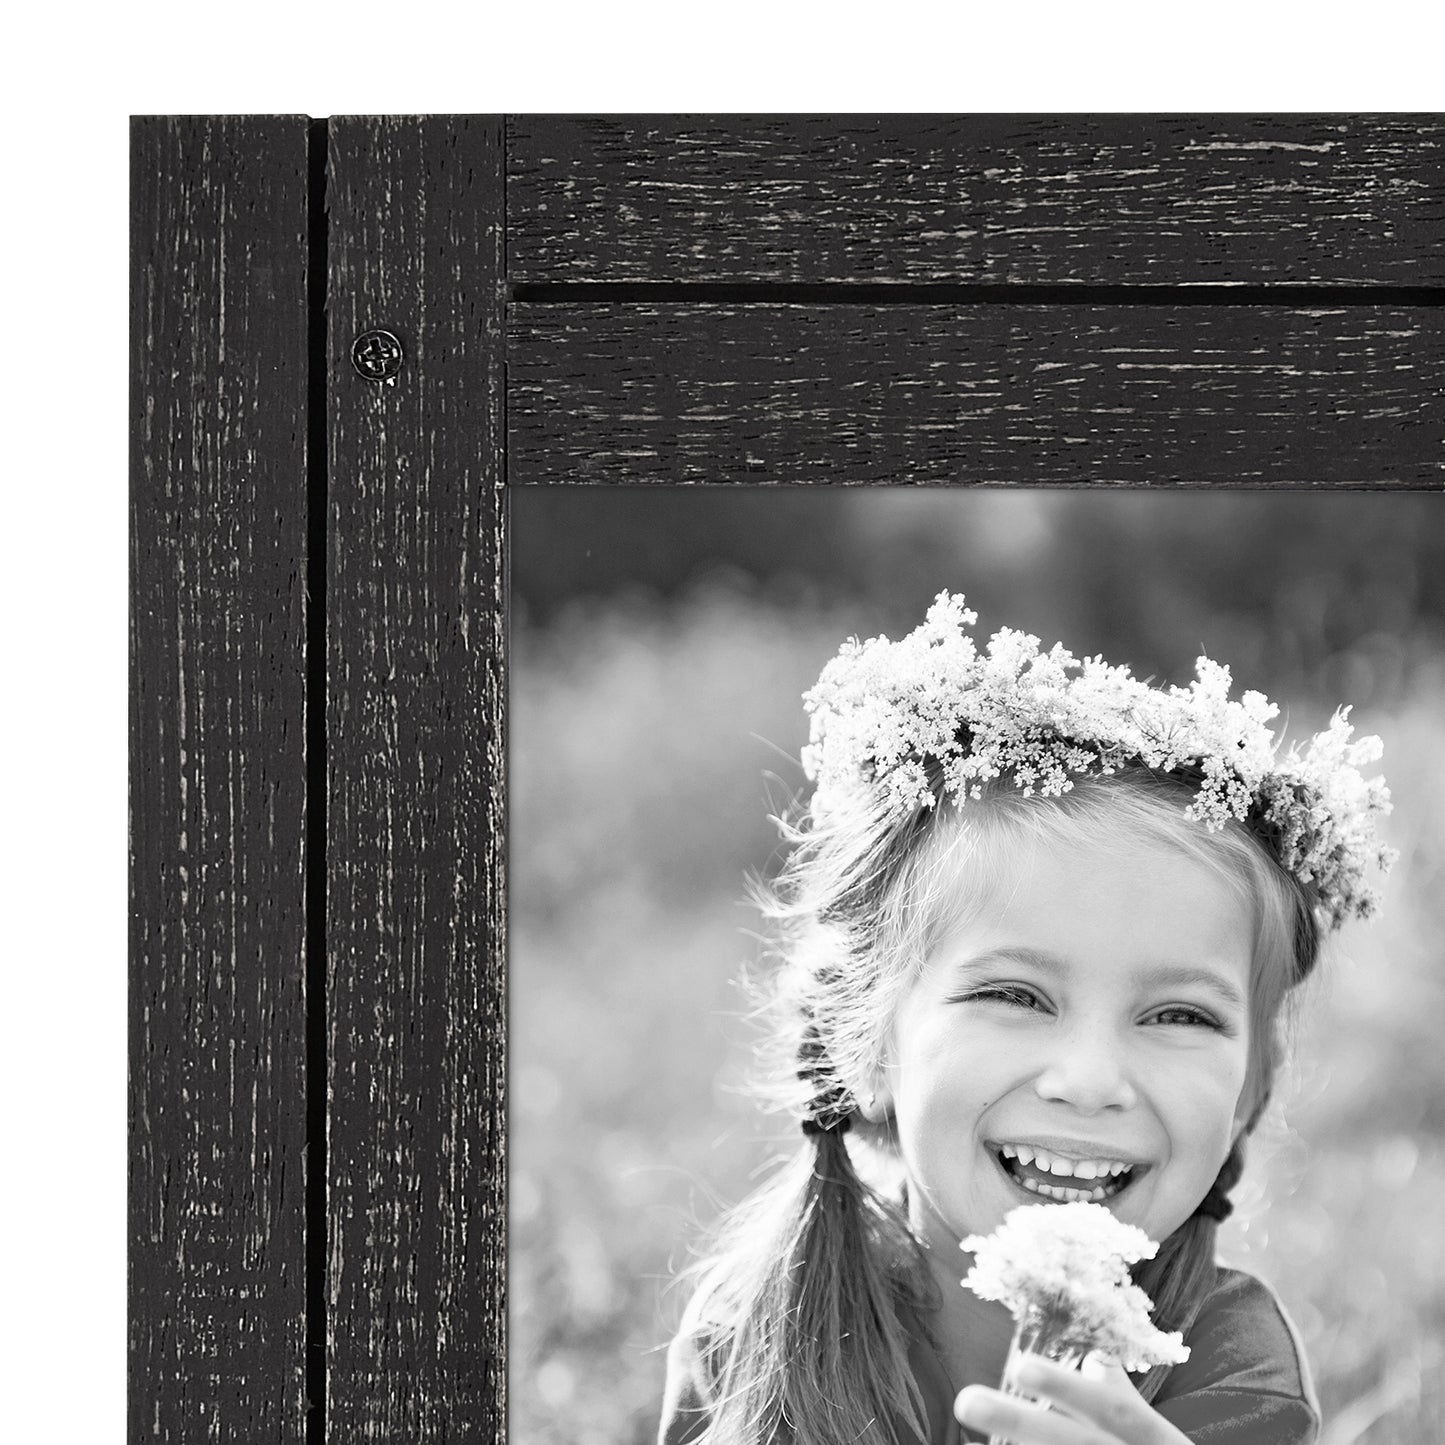 Distressed MDF Frames - Ready to Hang - Ready to Stand - Built-in Easels - Variety of colors and sizes